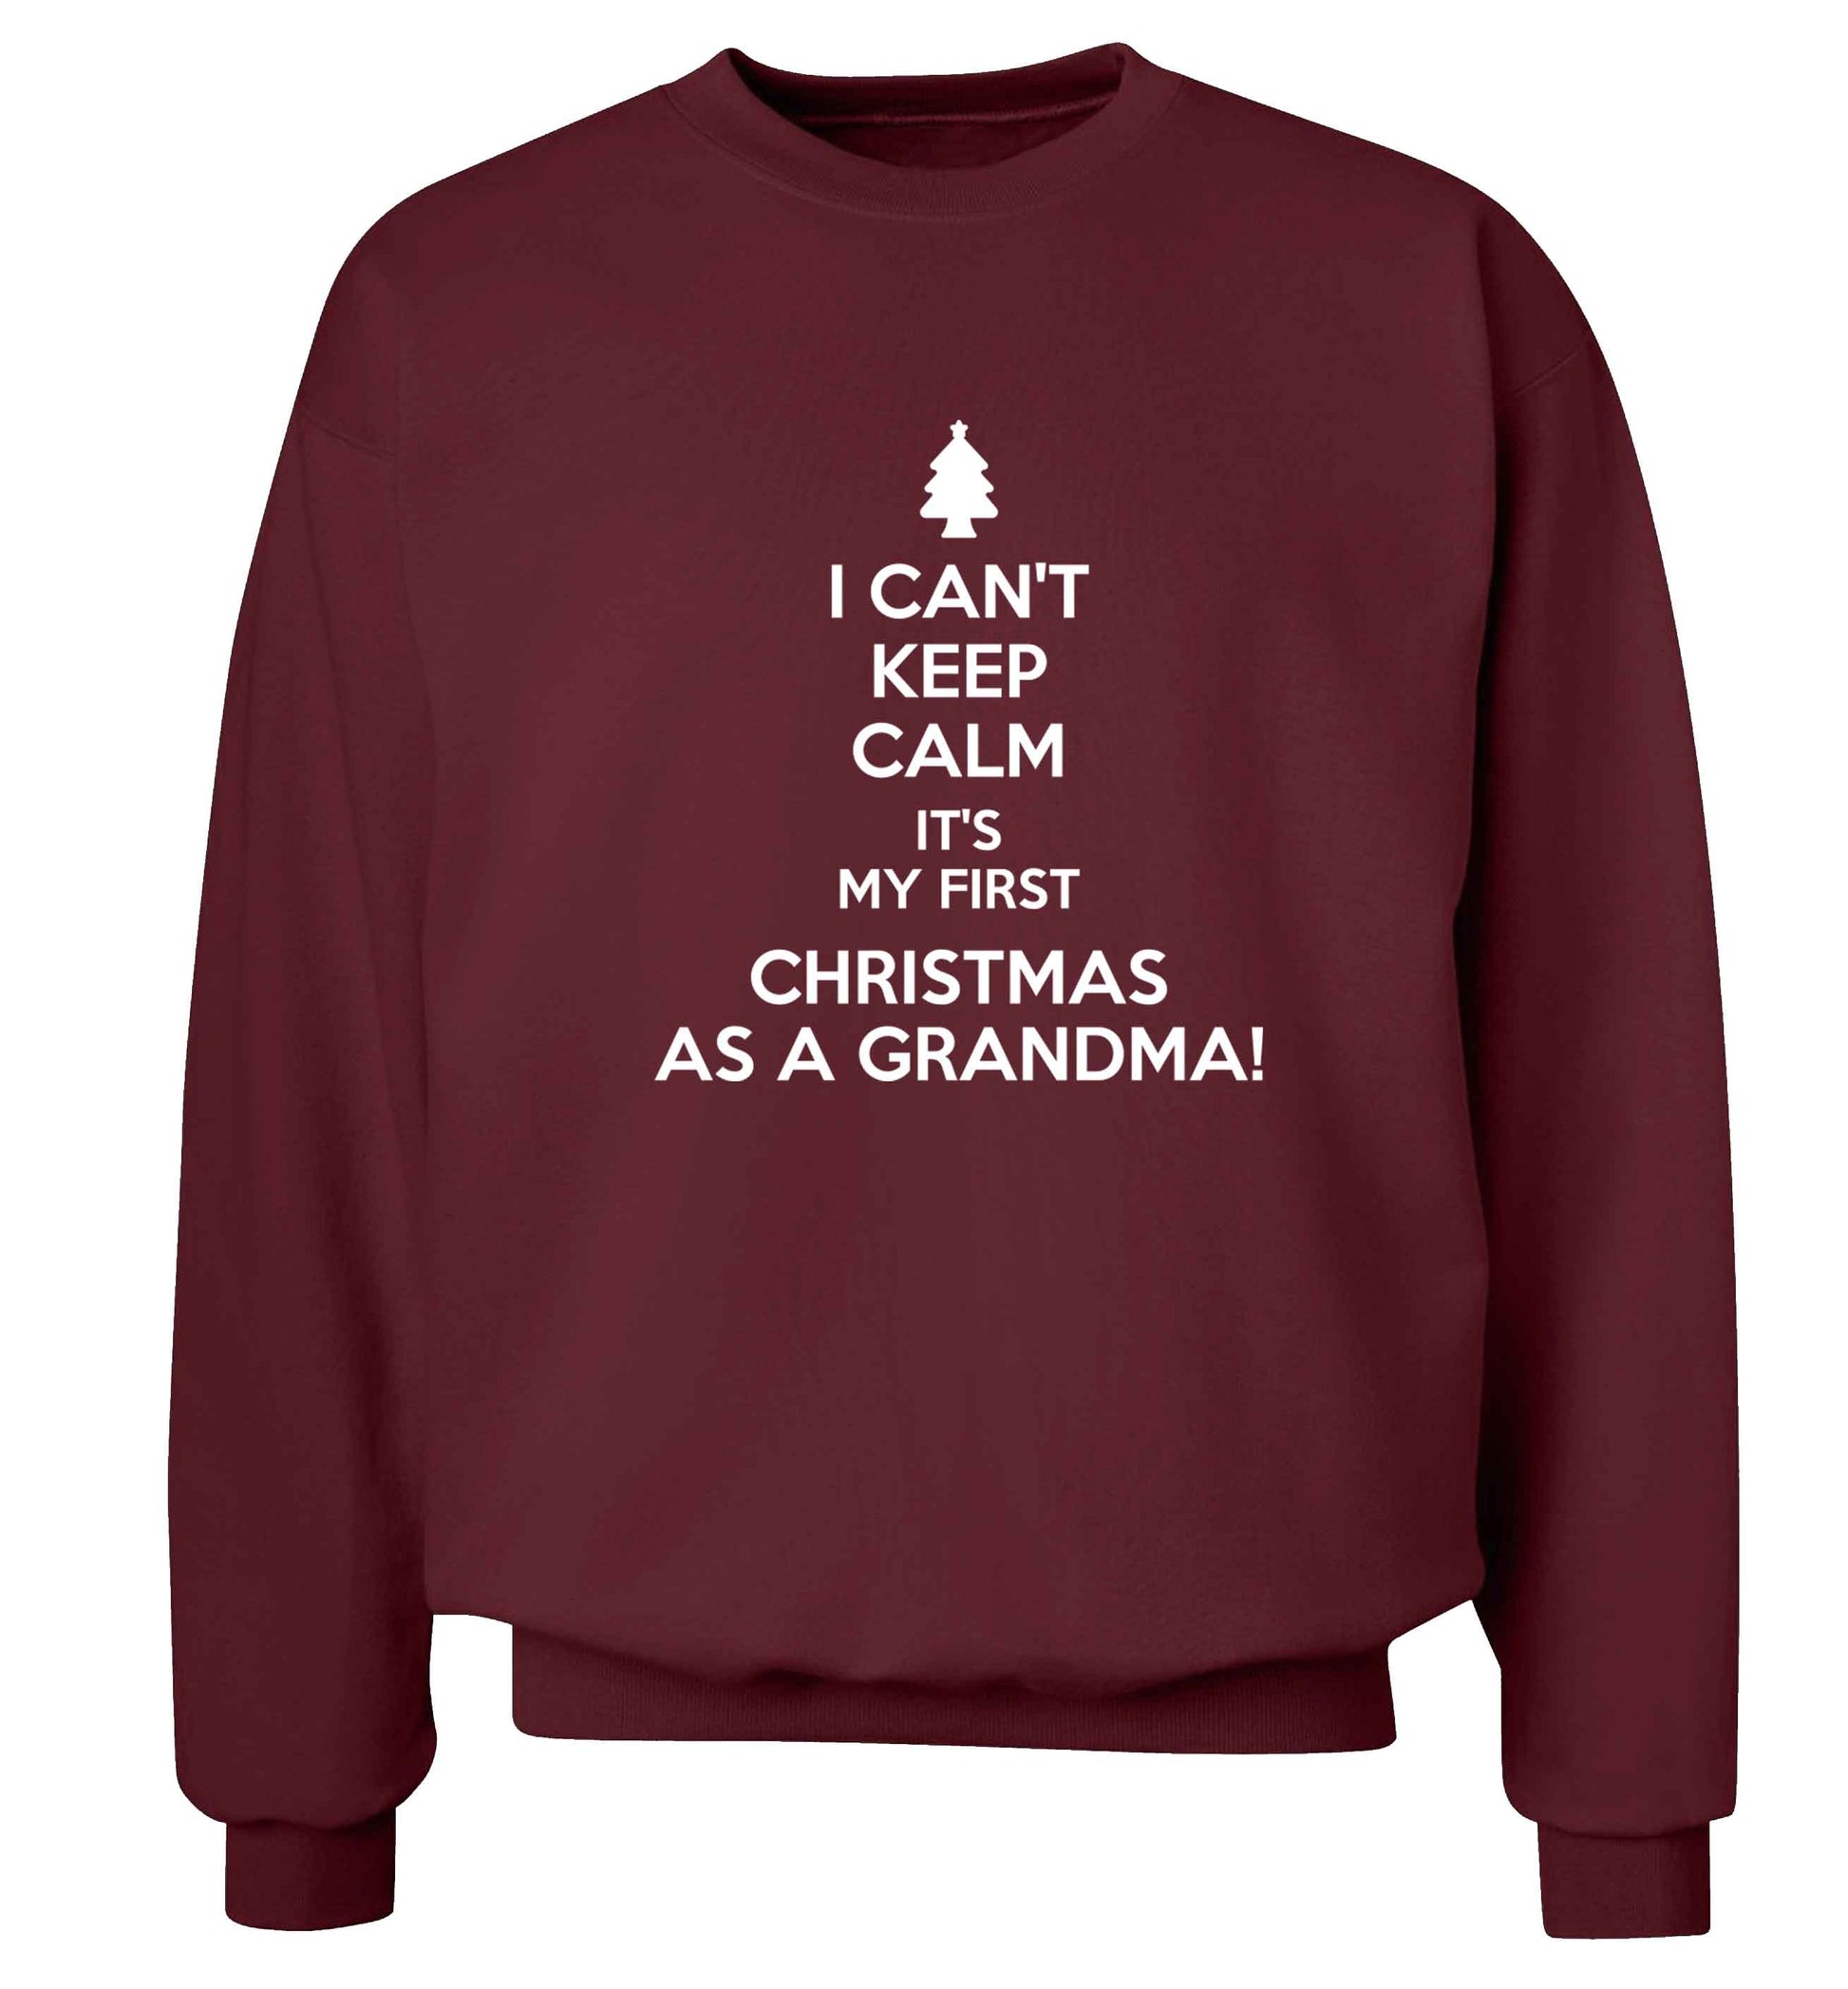 I can't keep calm it's my first Christmas as a grandma! Adult's unisex maroon Sweater 2XL